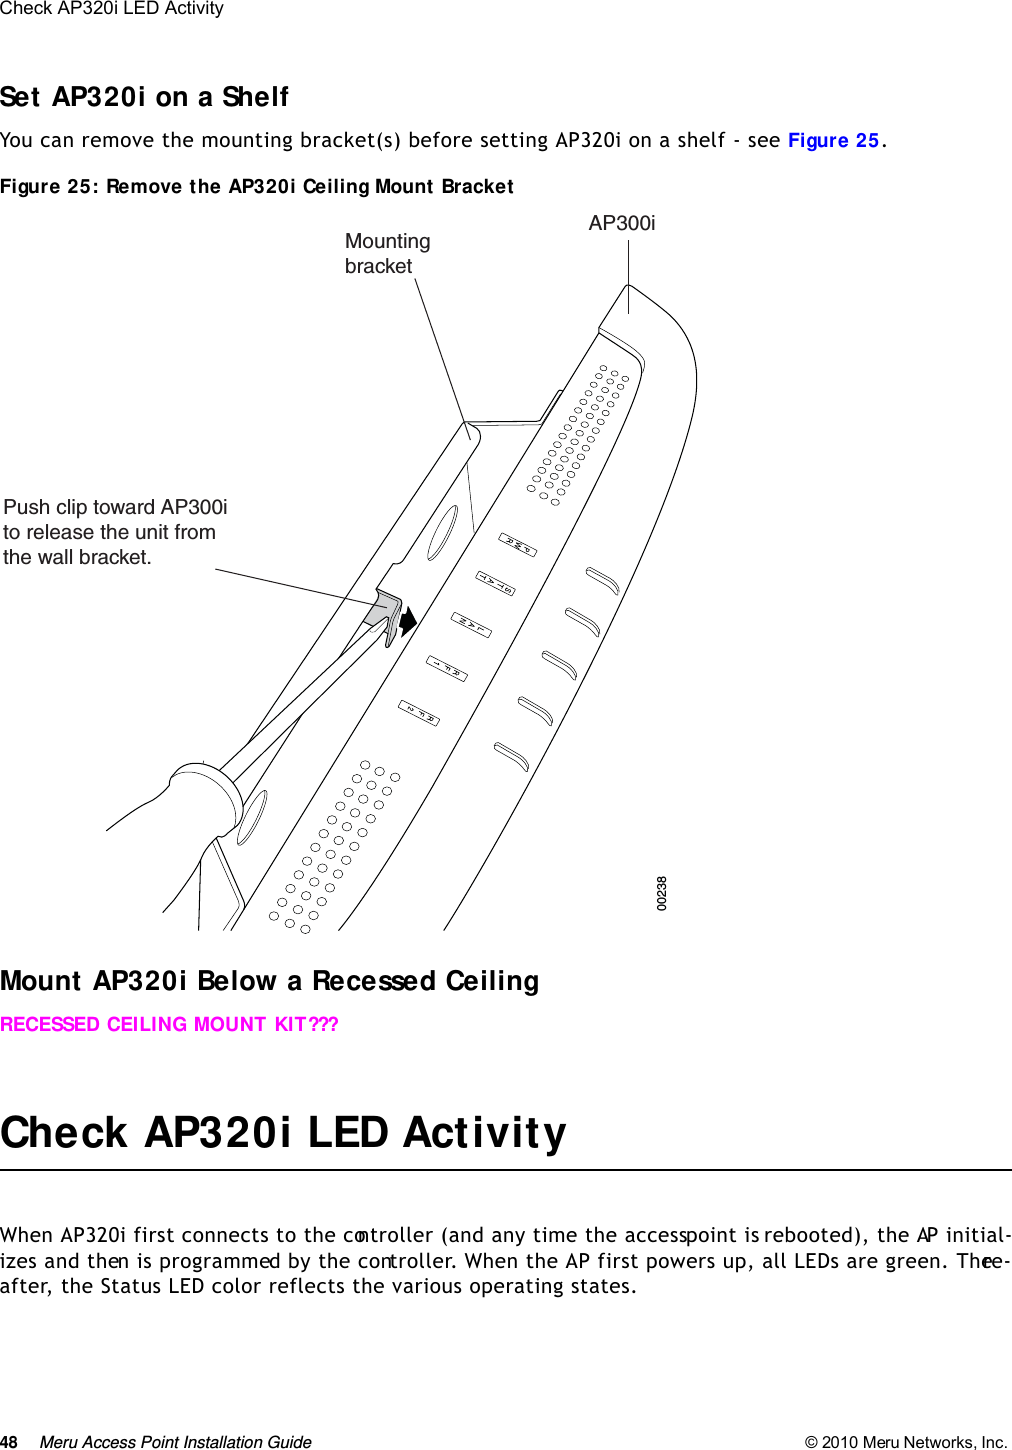 48 Meru Access Point Installation Guide © 2010 Meru Networks, Inc. Check AP320i LED Activity Set AP320i on a ShelfYou can remove the mounting bracket(s) before setting AP320i on a shelf - see Figure 25.Figure 25: Remove the AP320i Ceiling Mount Bracket Mount AP320i Below a Recessed CeilingRECESSED CEILING MOUNT KIT???Check AP320i LED ActivityWhen AP320i first connects to the controller (and any time the access point is rebooted), the AP initial-izes and then is programmed by the controller. When the AP first powers up, all LEDs are green. There-after, the Status LED color reflects the various operating states. Push clip toward AP300ito release the unit from the wall bracket.MountingbracketAP300i00238